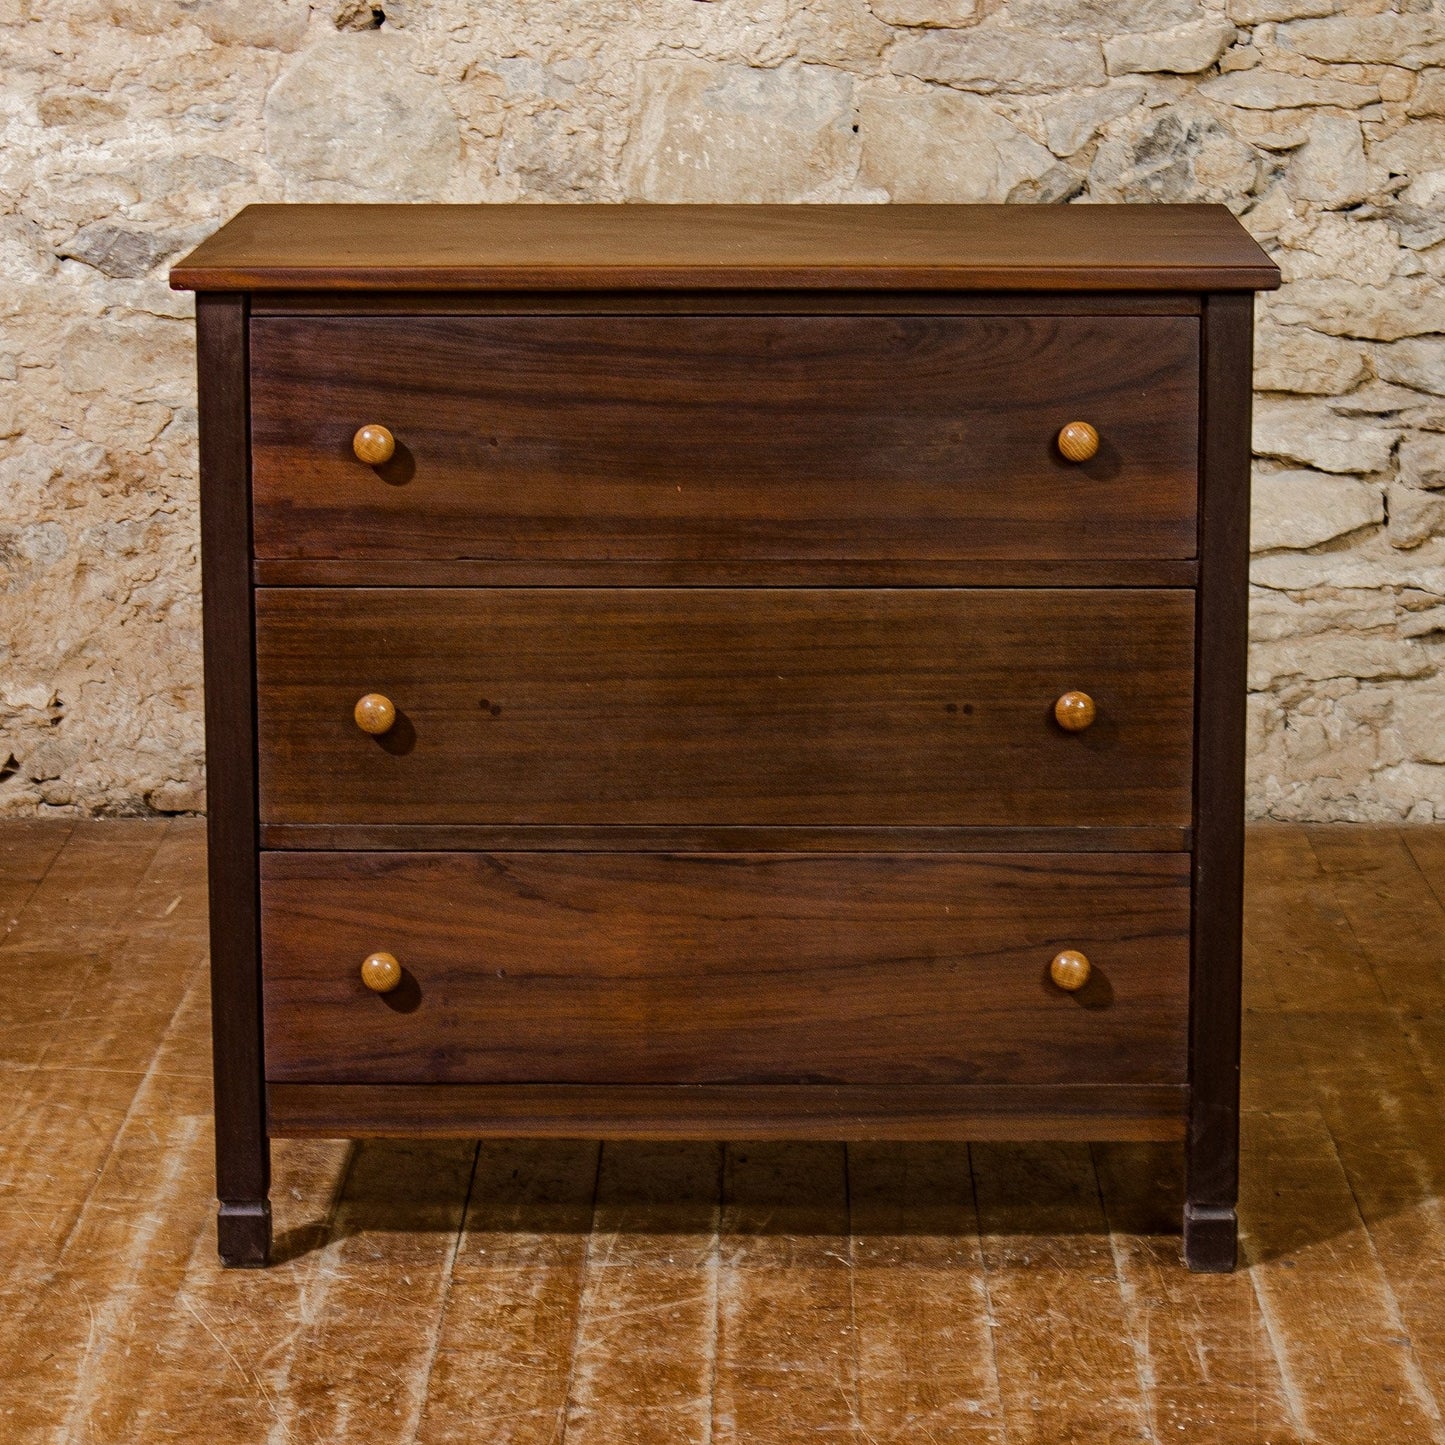 Gordon Russell Arts & Crafts Cotswold School Coxwell Chest of Drawers 1929